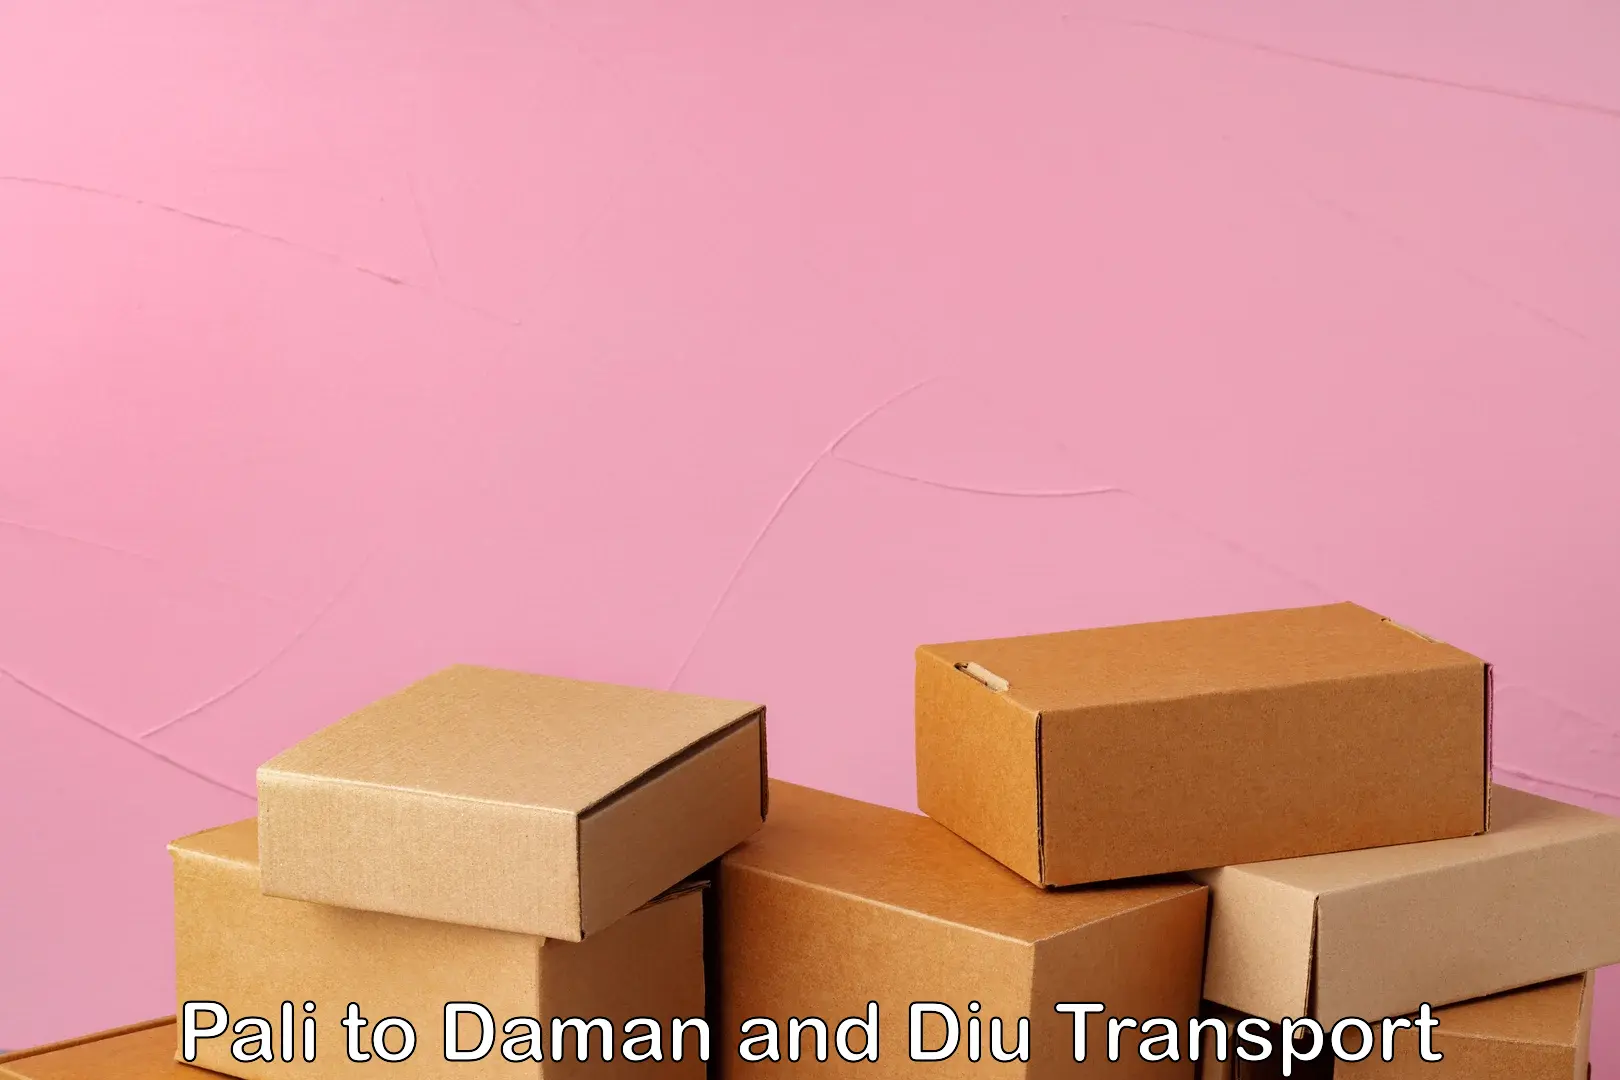 Transport shared services Pali to Daman and Diu